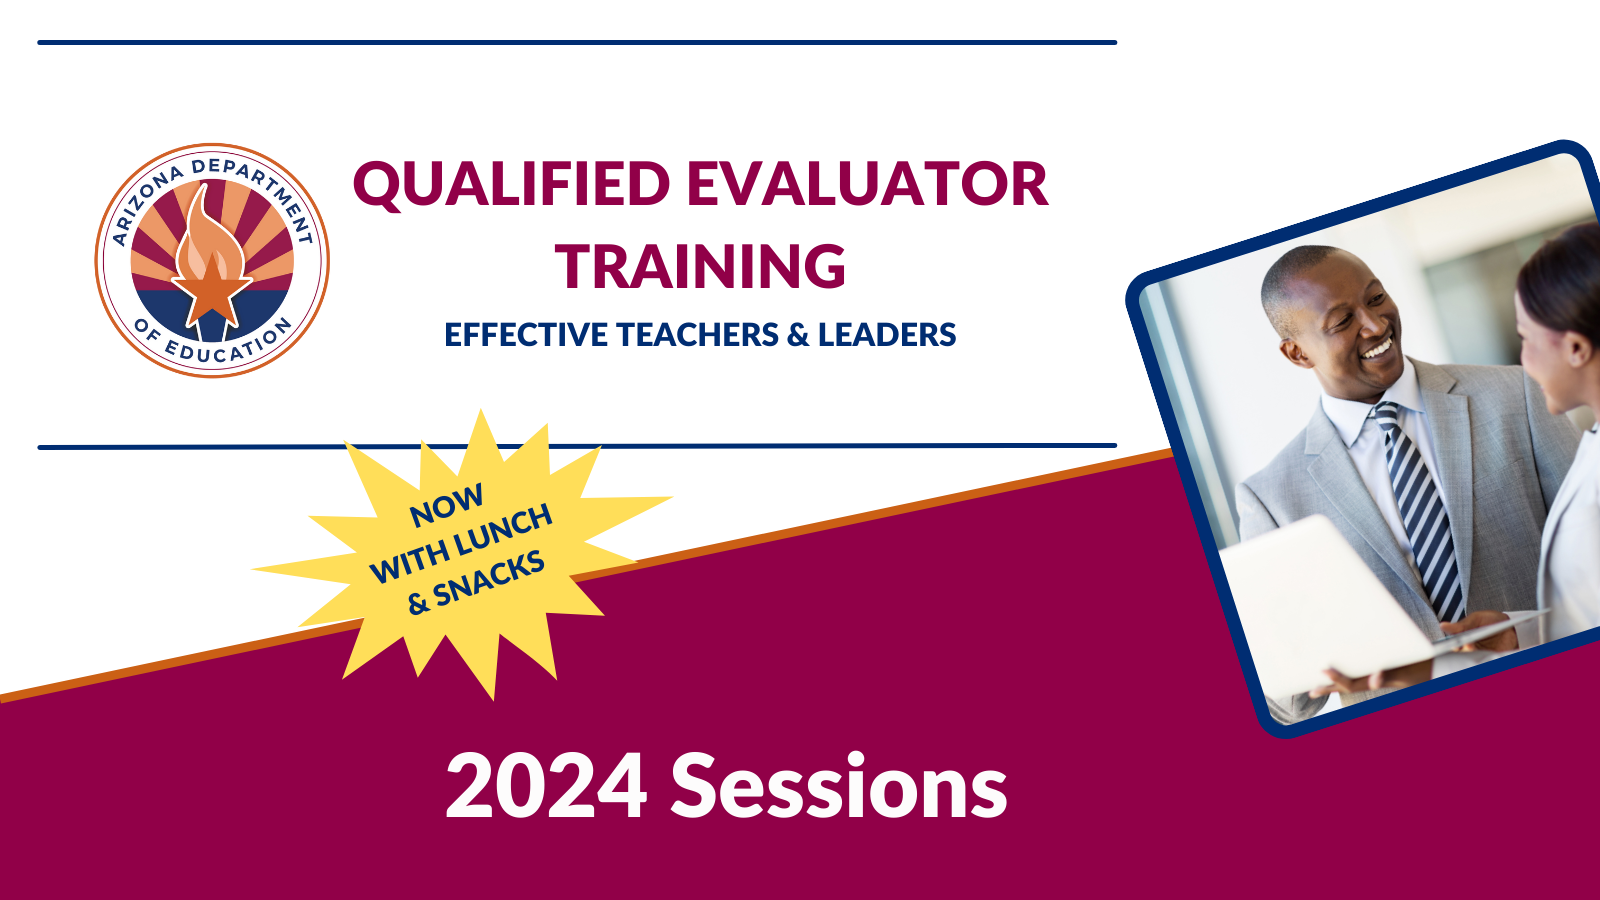 Qualified Evaluator Training 2024 Sessions Lunch and Snacks